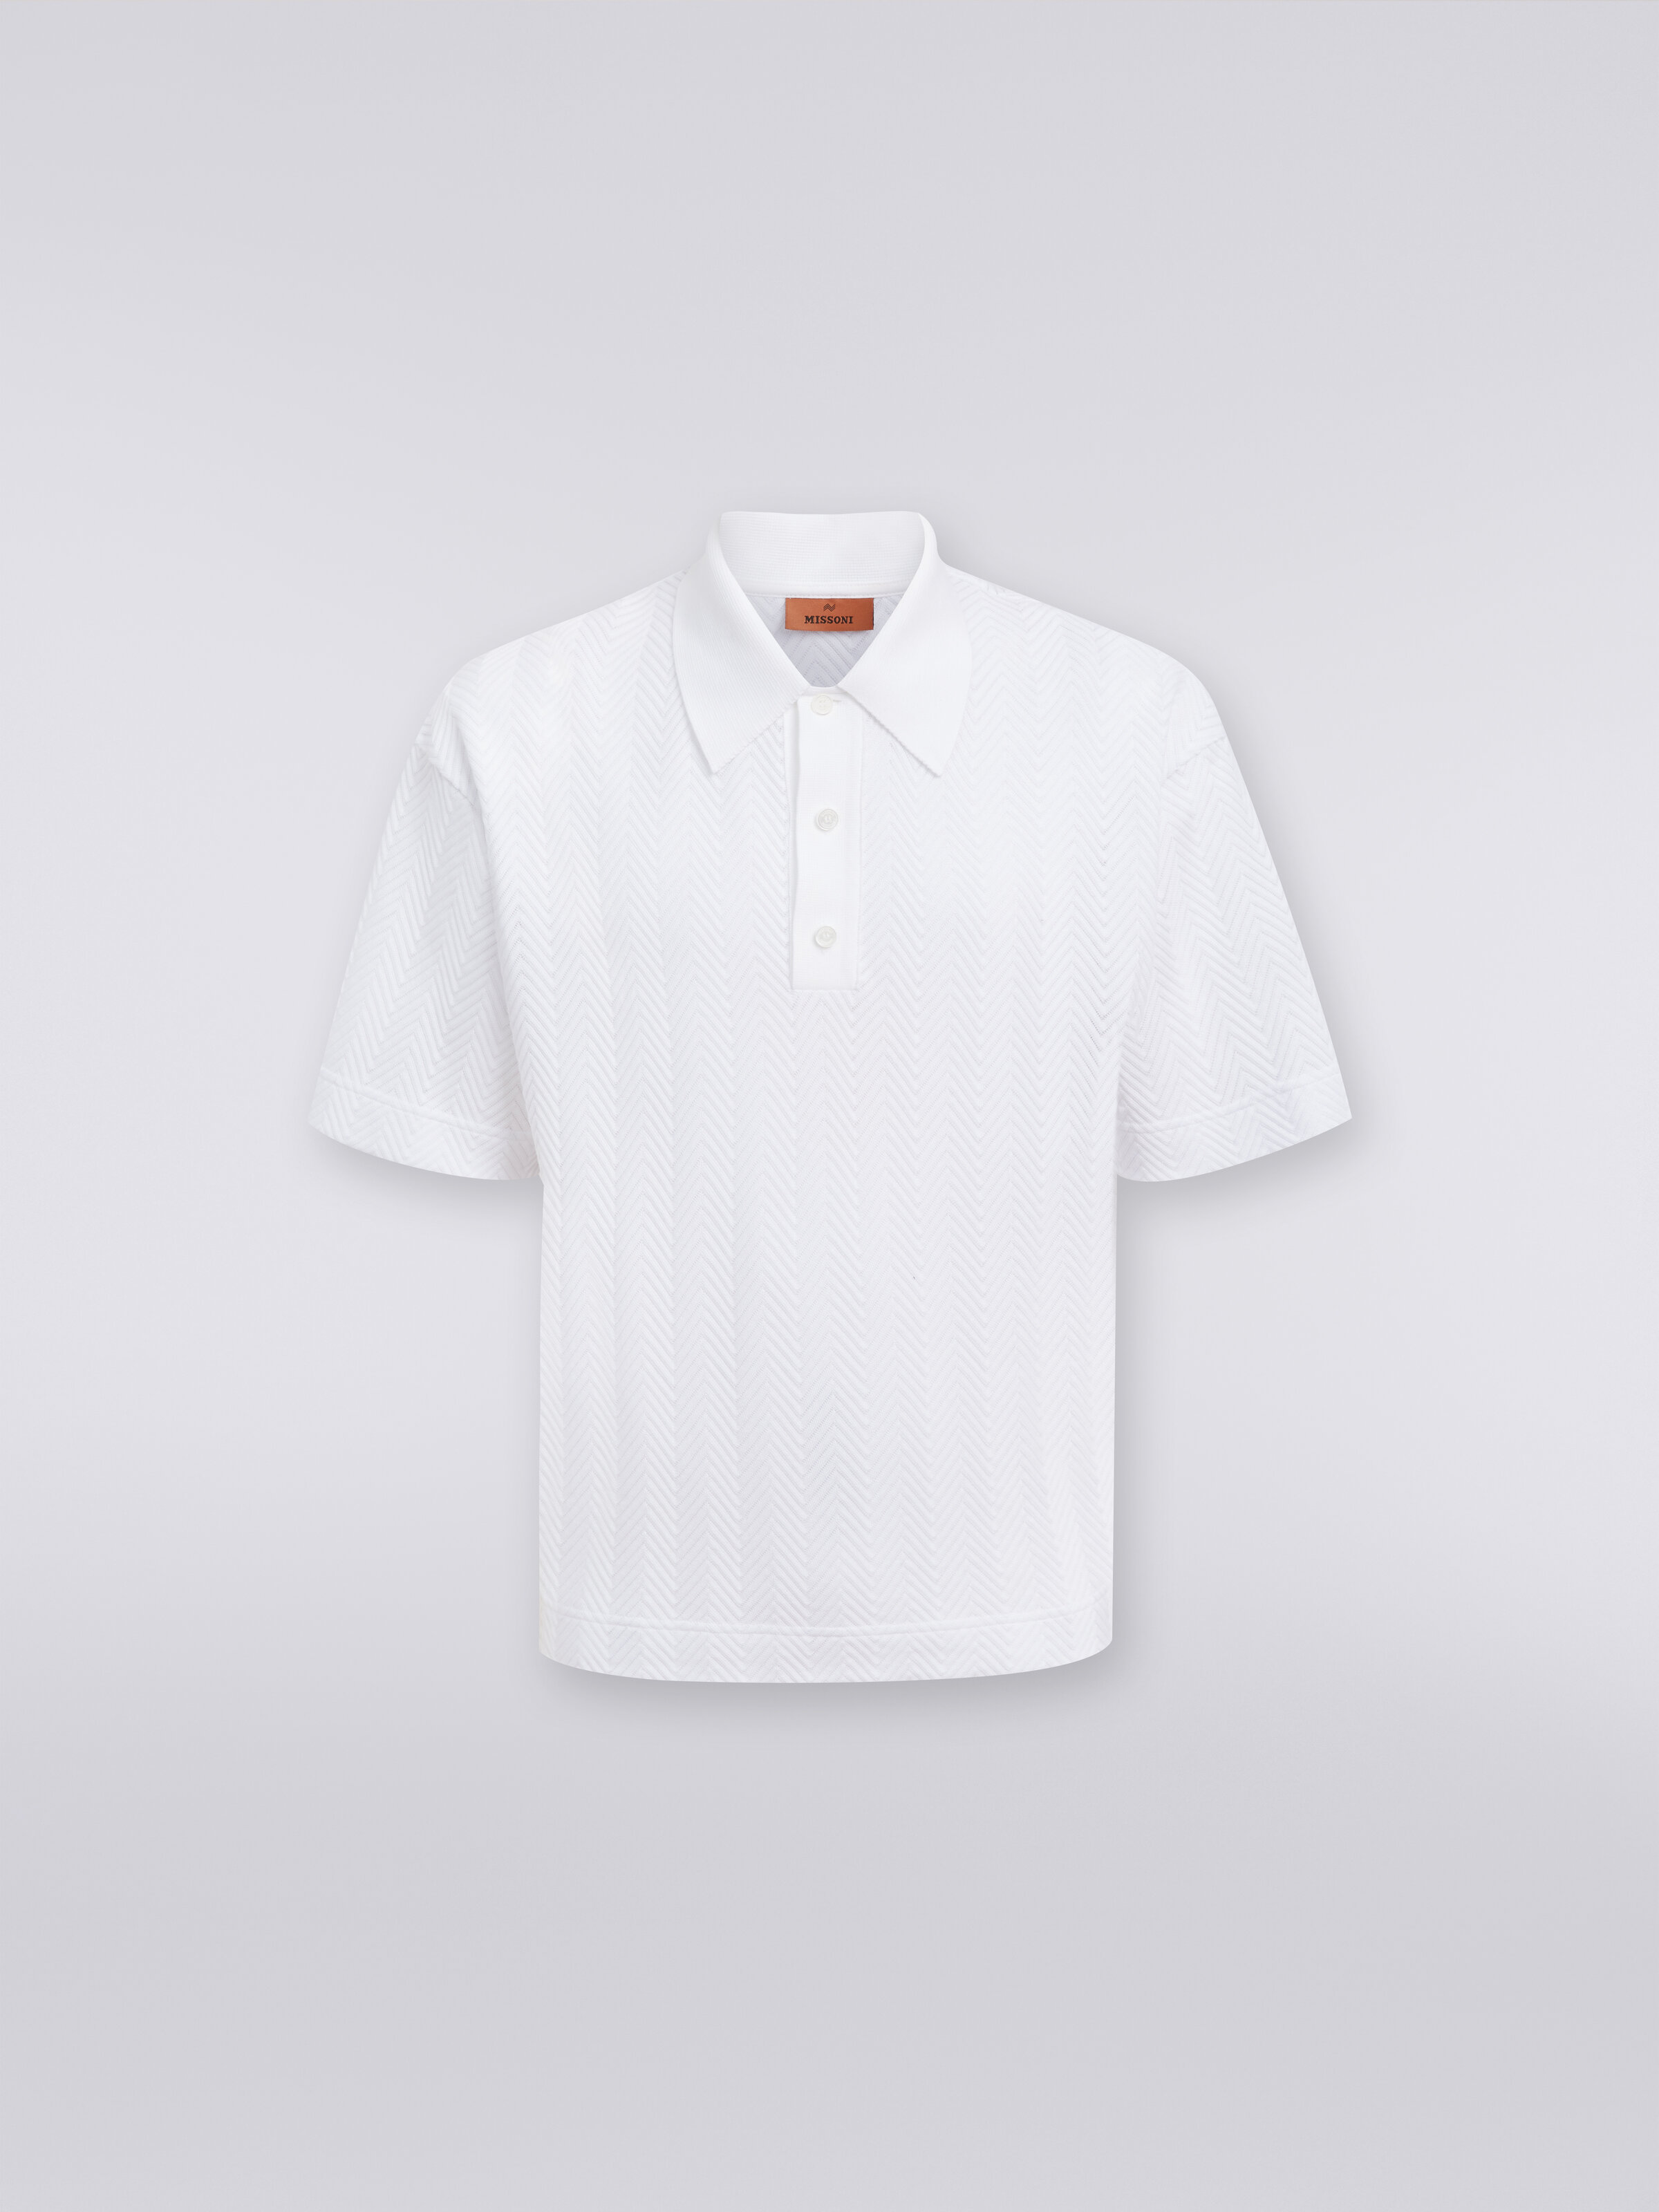 Short-sleeved polo shirt in chevron viscose and cotton, White  - 0